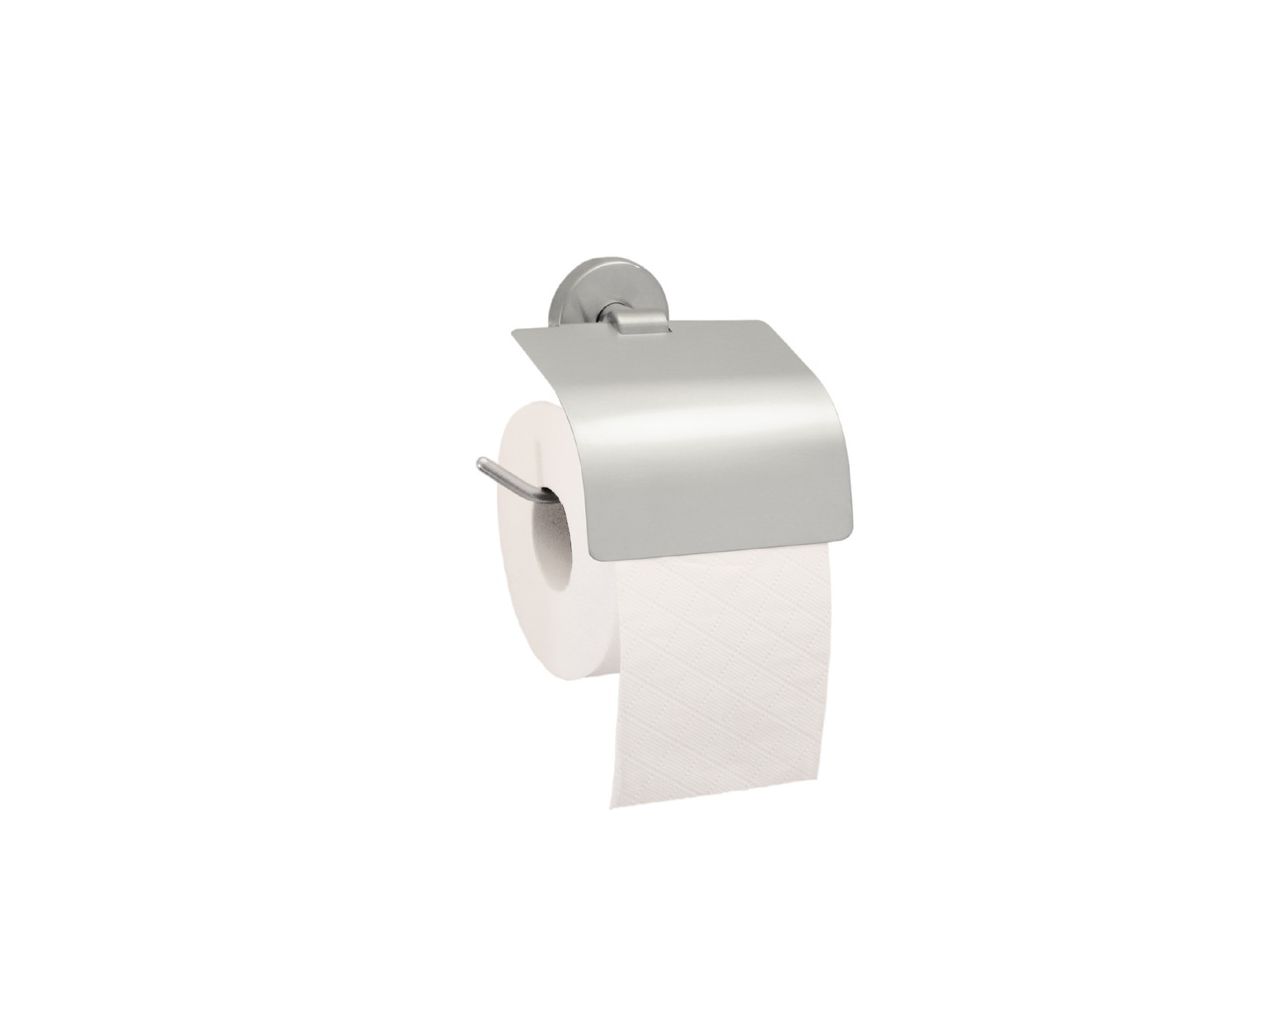 Toilet roll holder with cover, made of chrome plated brass (satin version)